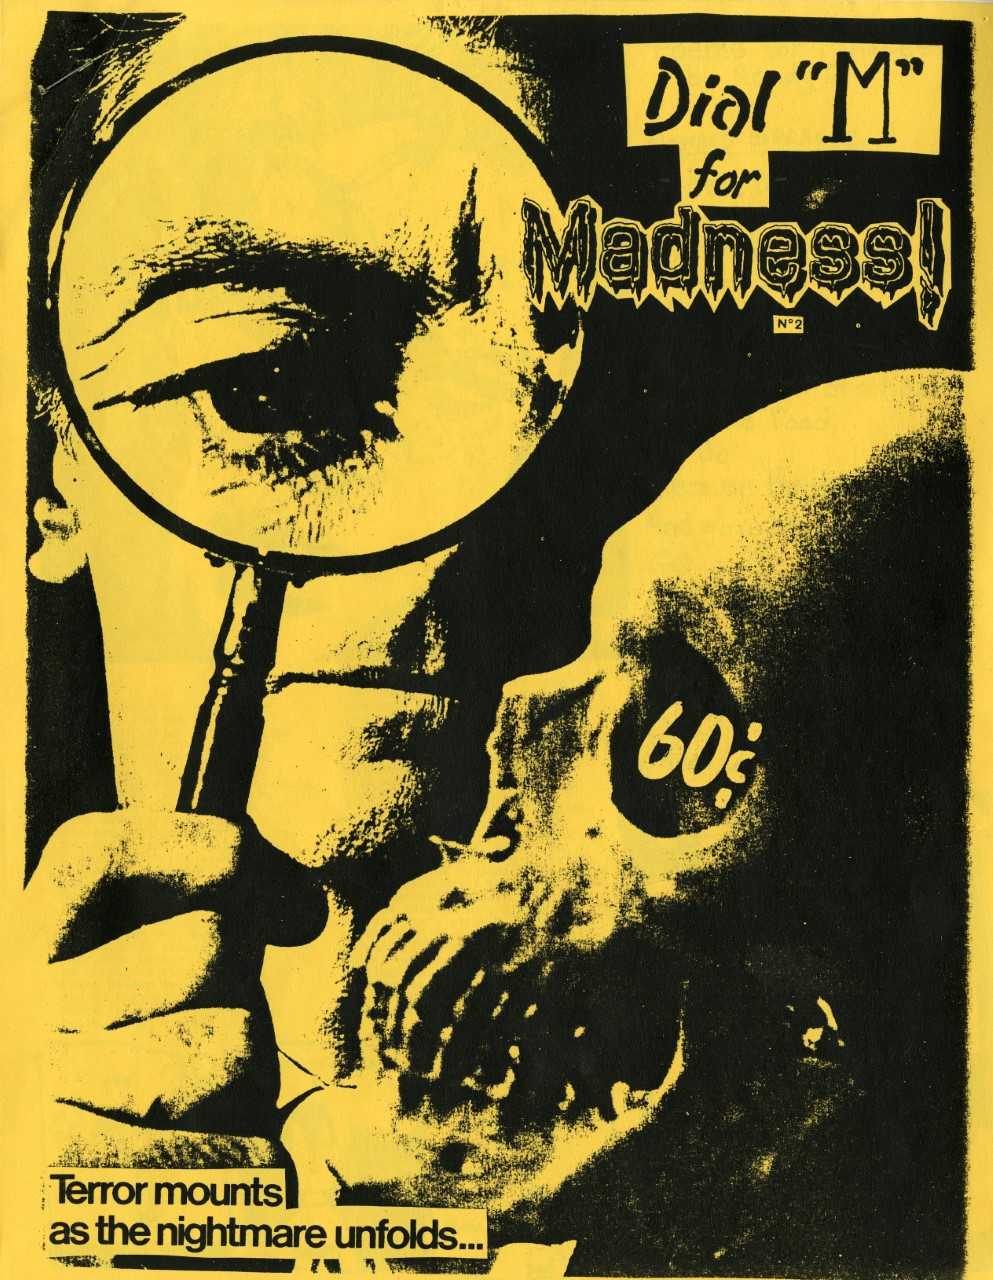 Front cover of Dial "M" for Madness zine yellow cover of a man looking at a skull through a magnifying glass